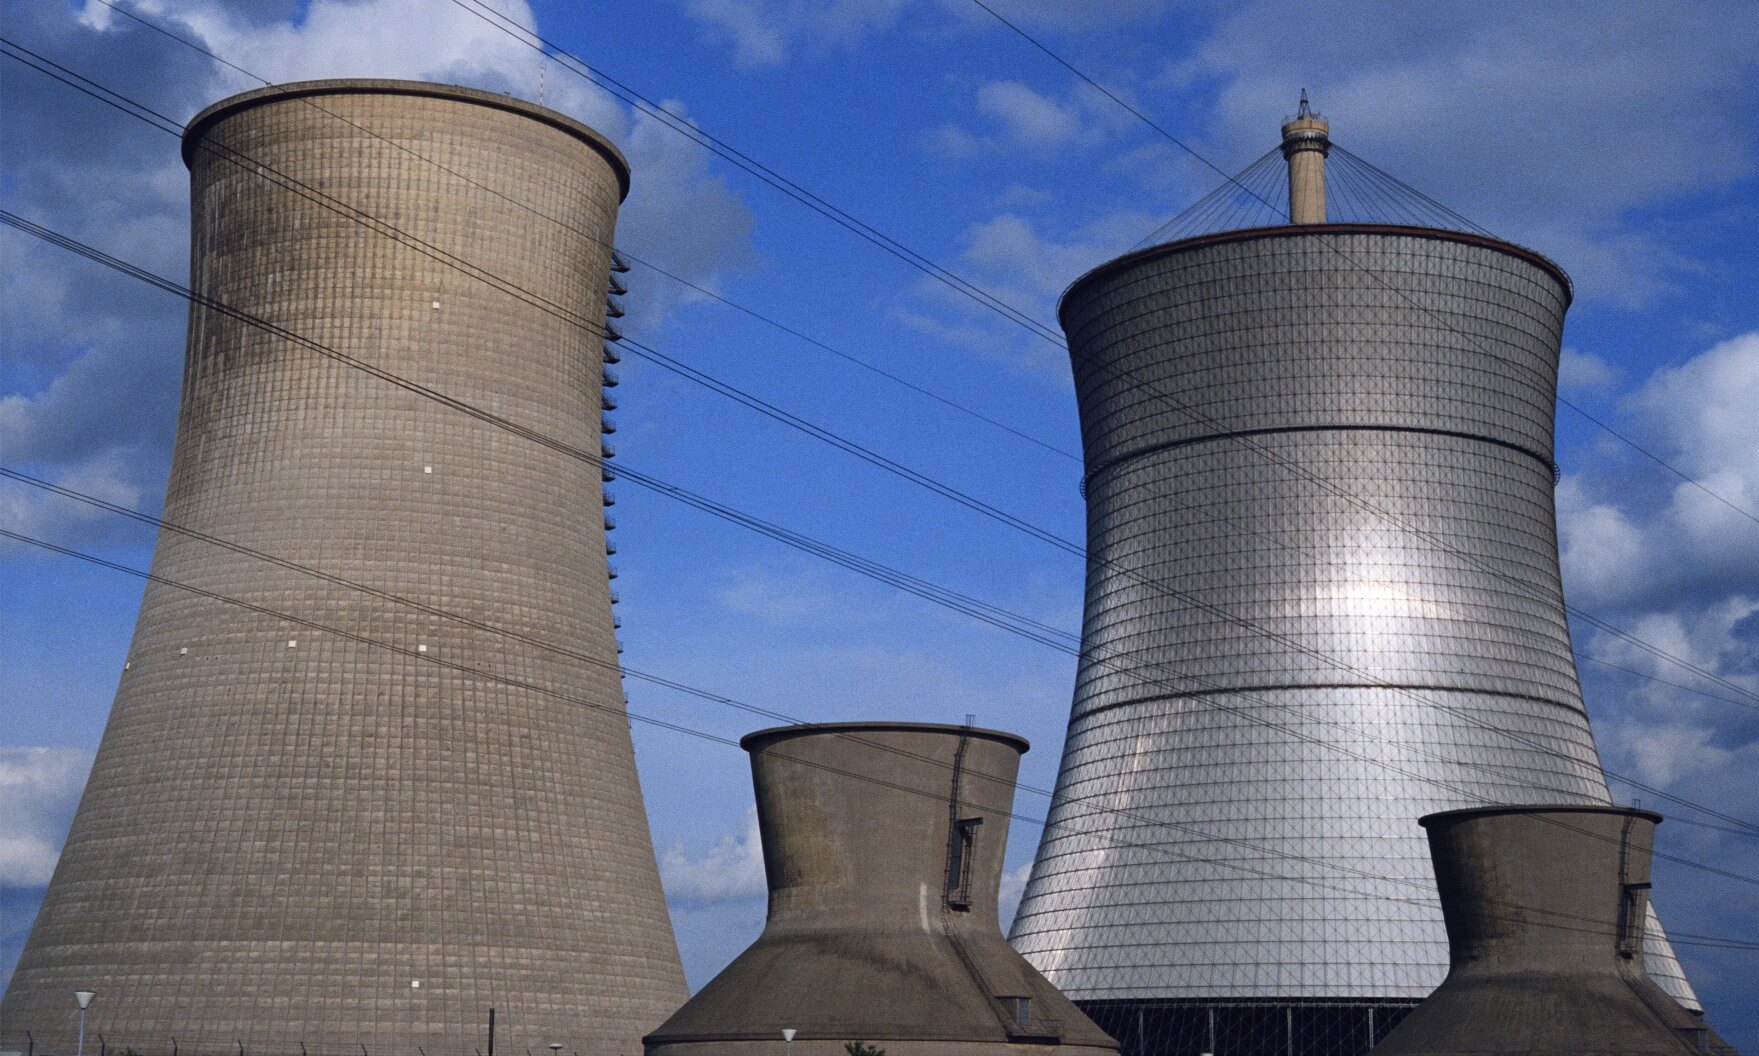 Cooling Towers of a Nuclear Power Plant